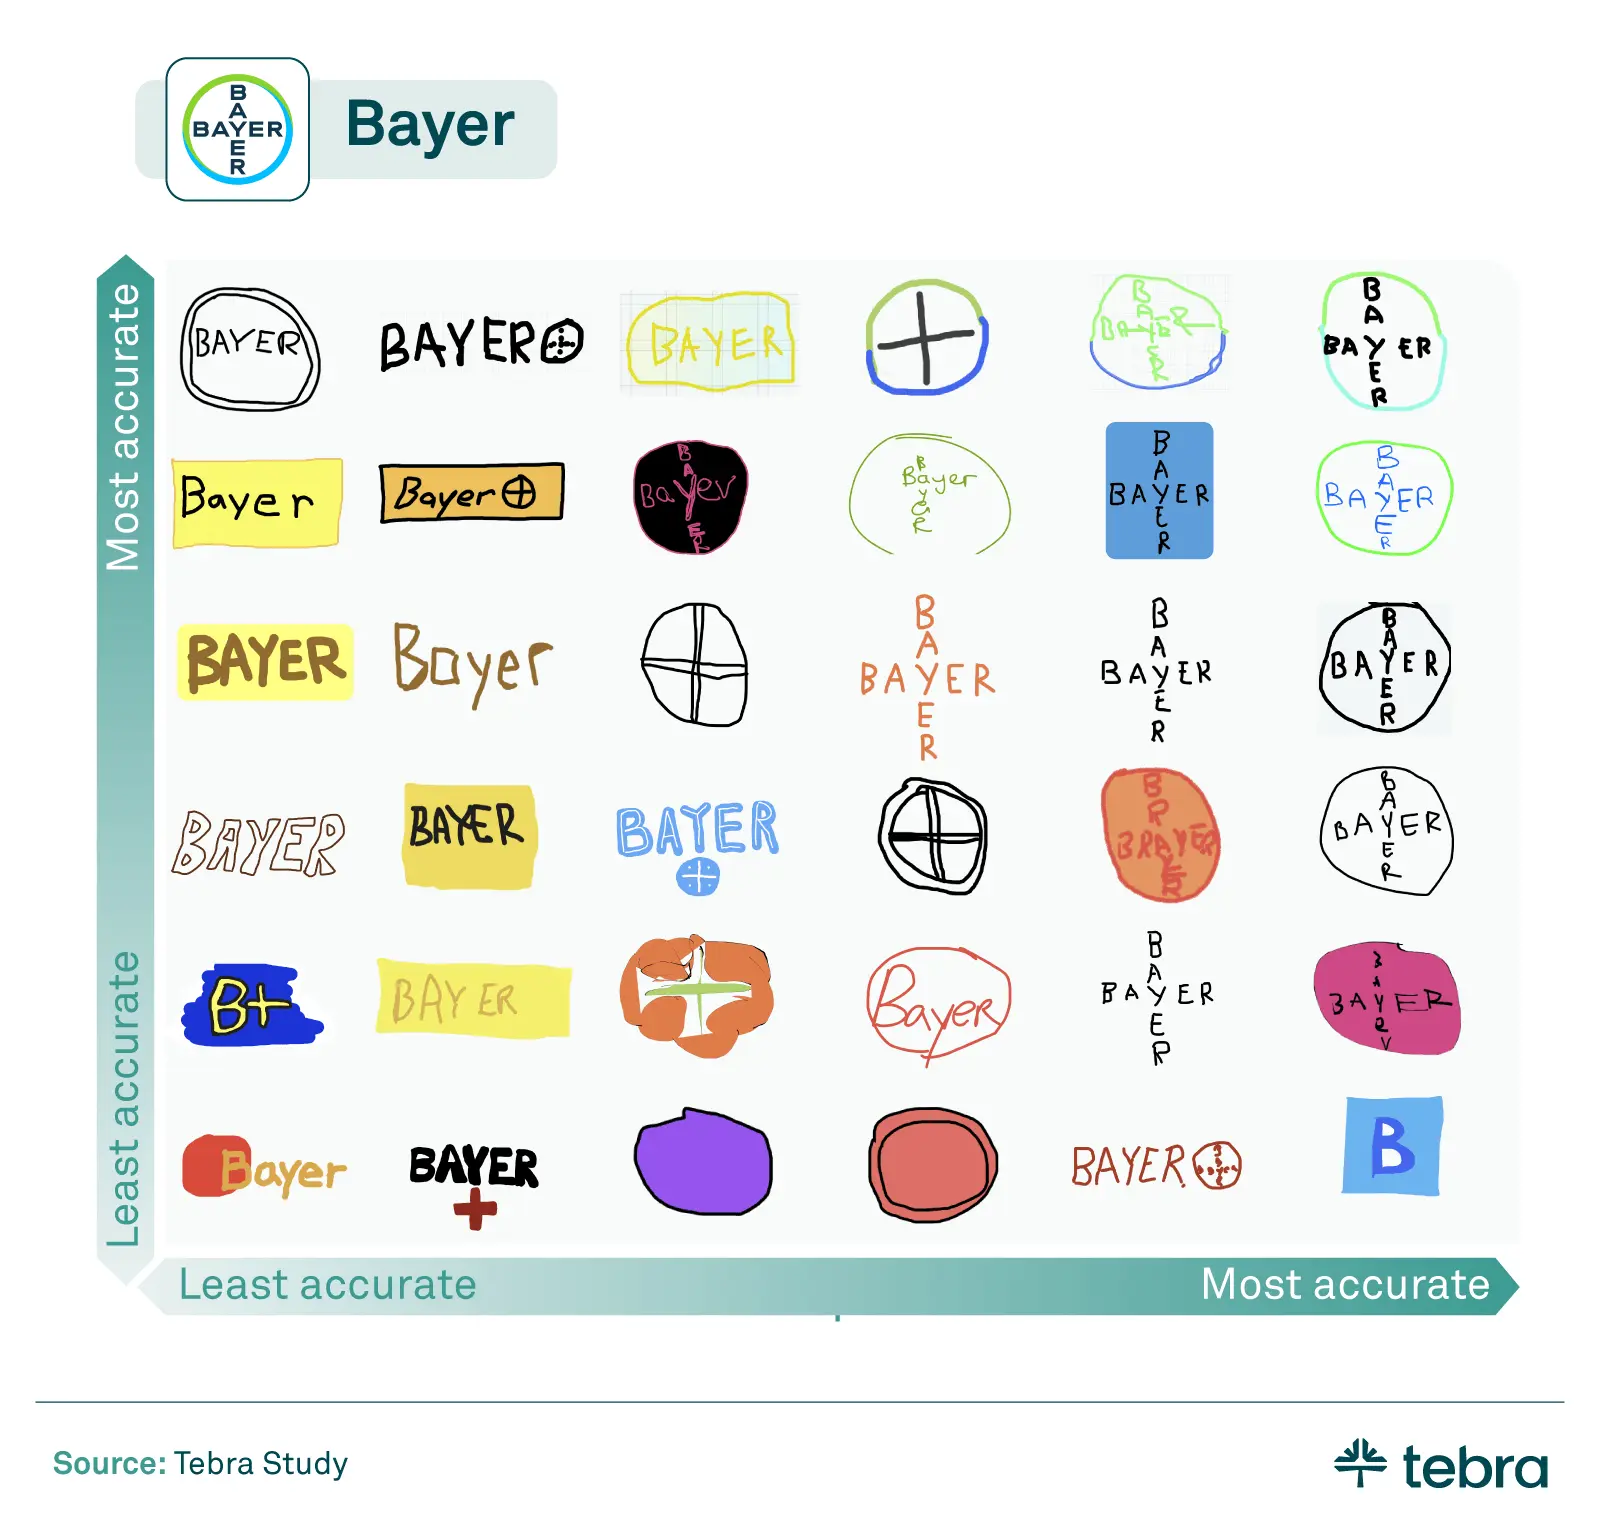 Bayer logo by poll respondents